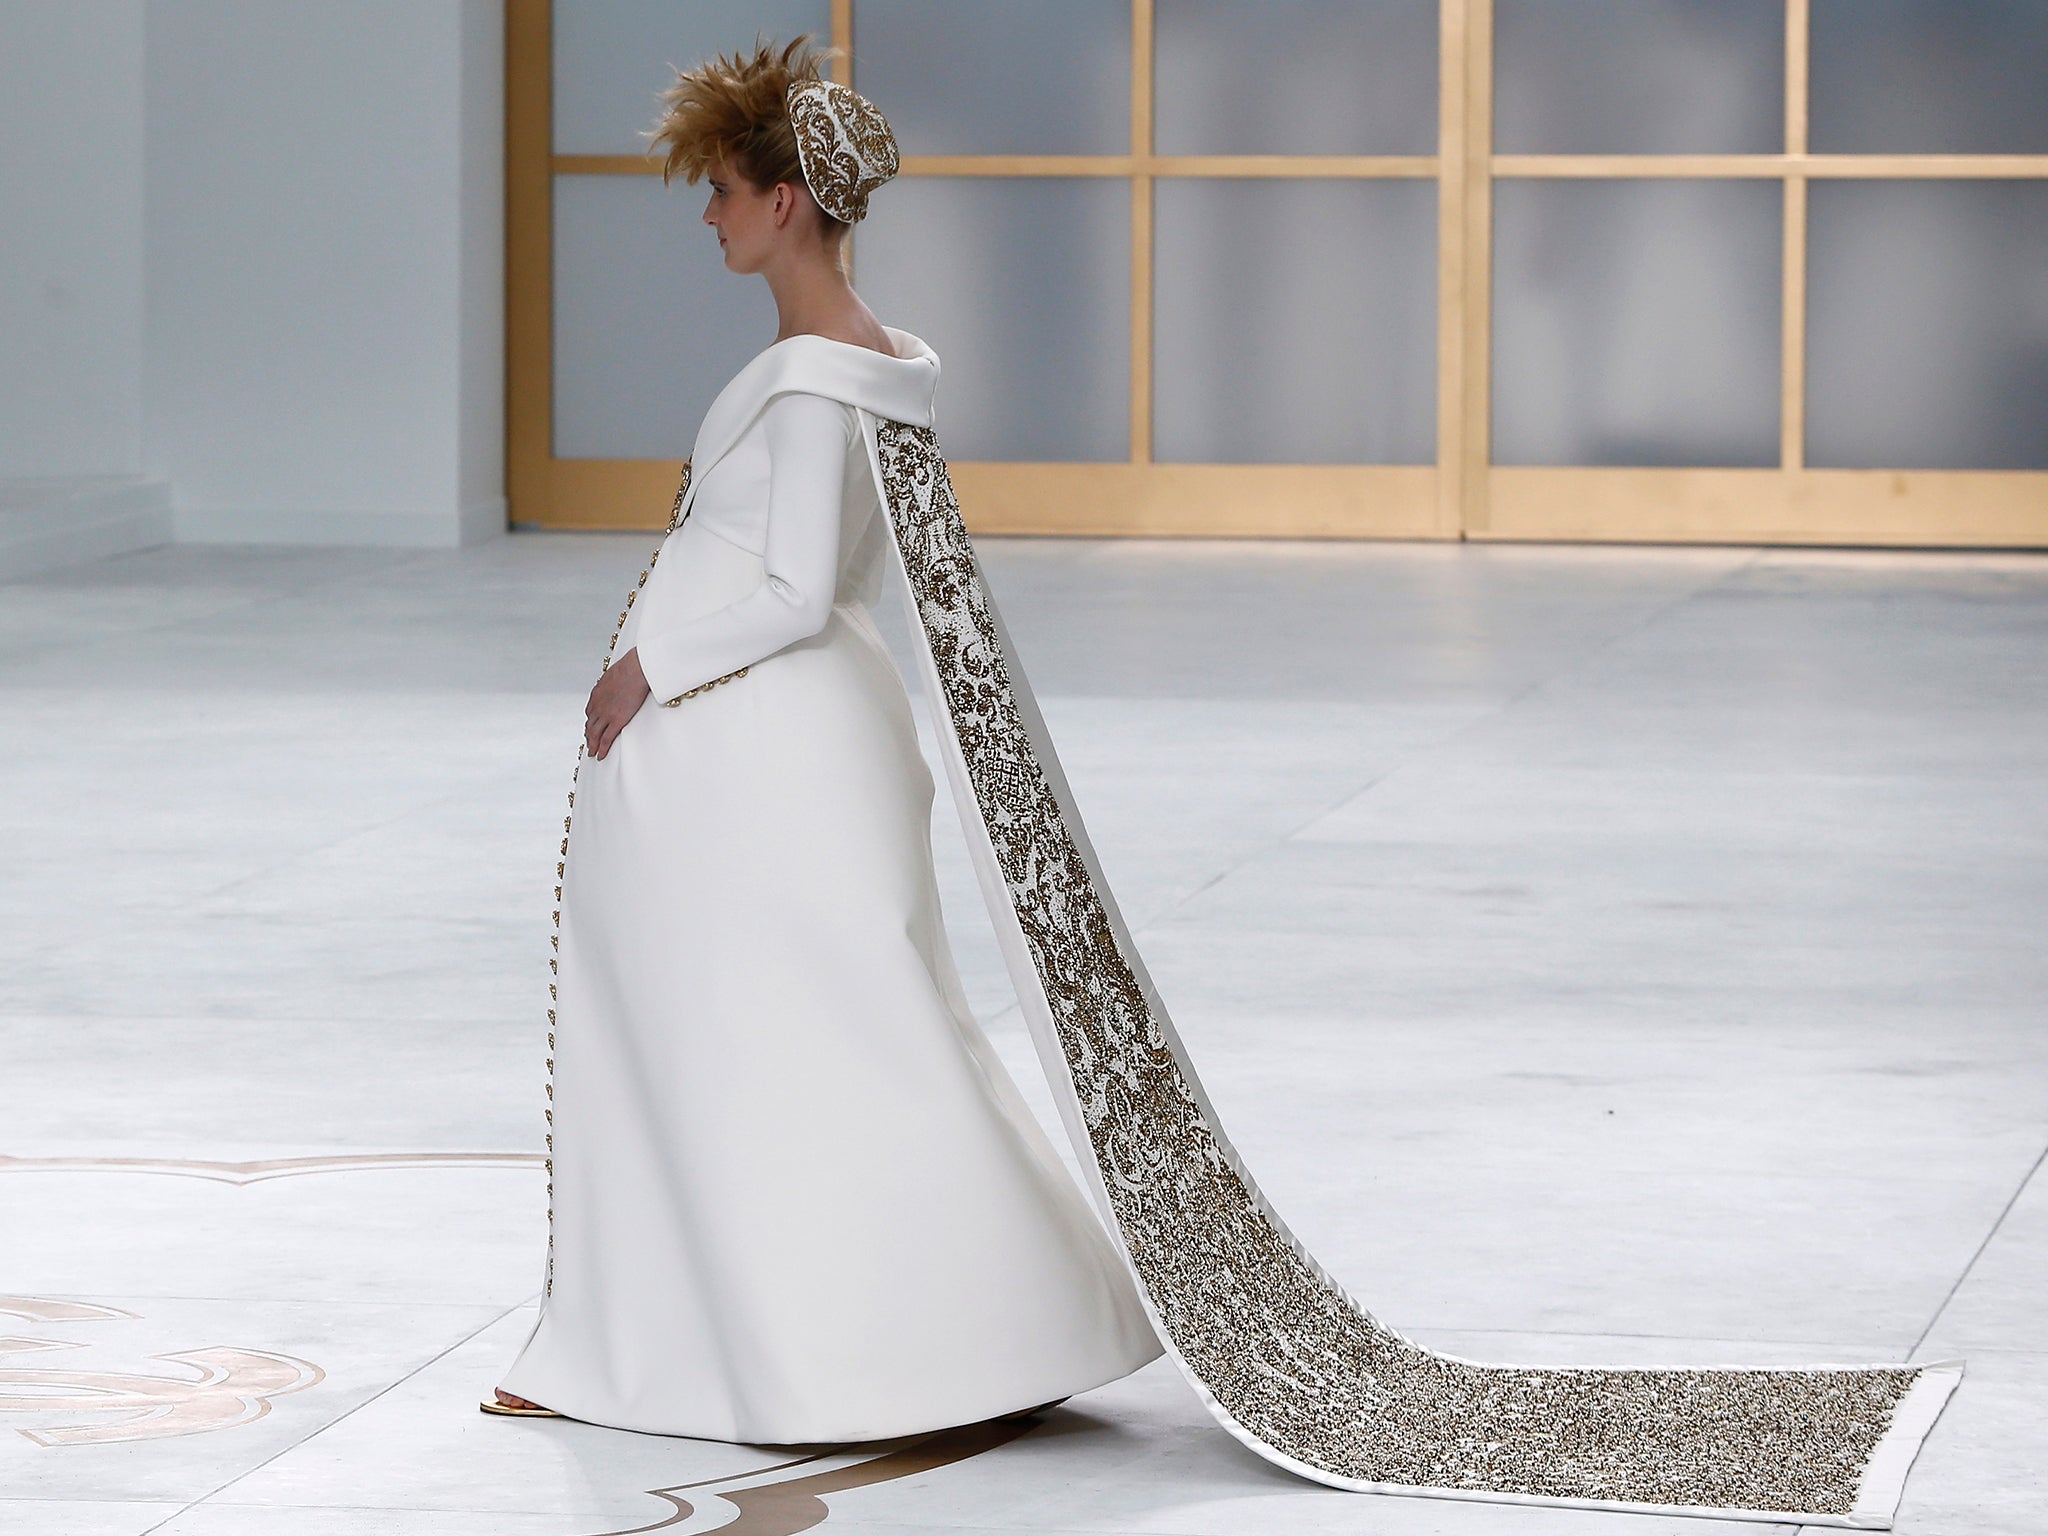 Time travel: echoes of the 1700s at Chanel a/w ‘14 couture